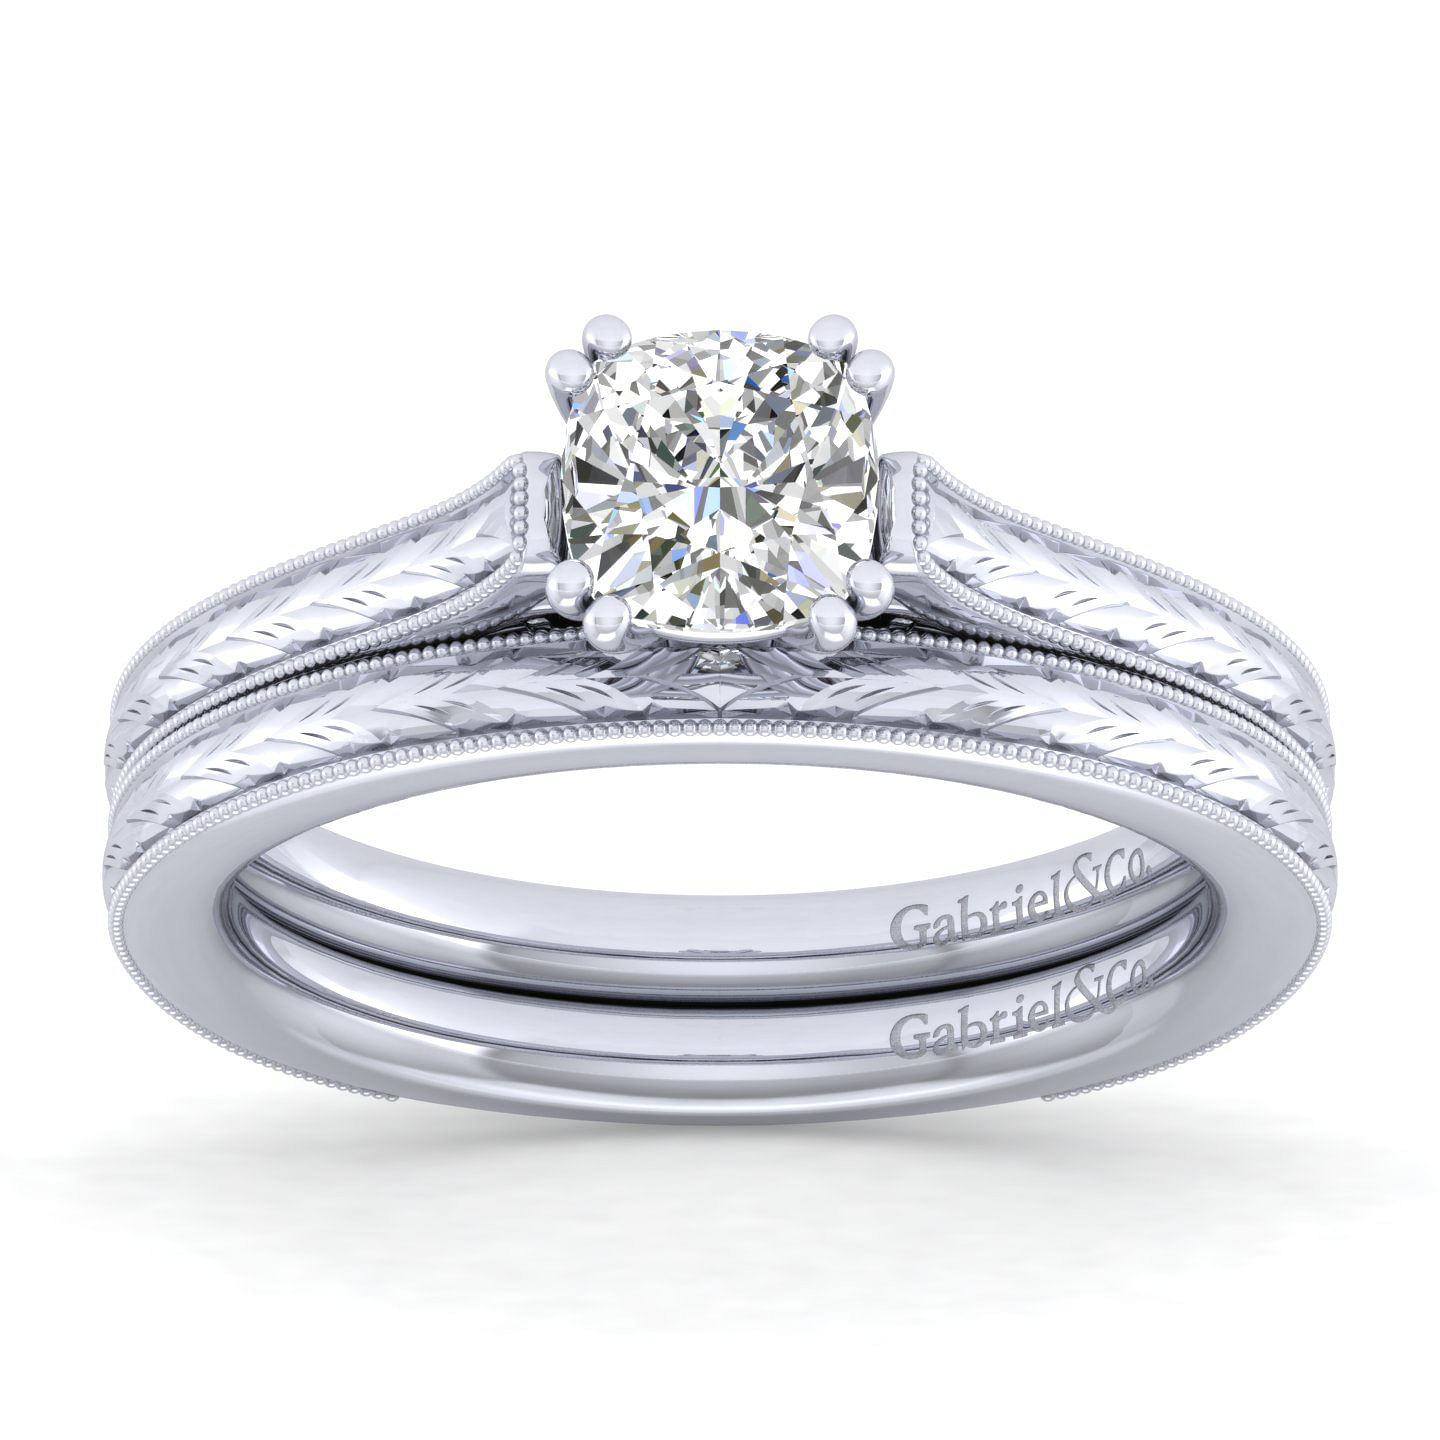 Vintage Inspired 14K White Gold Cushion Cut Solitaire Engagement Ring